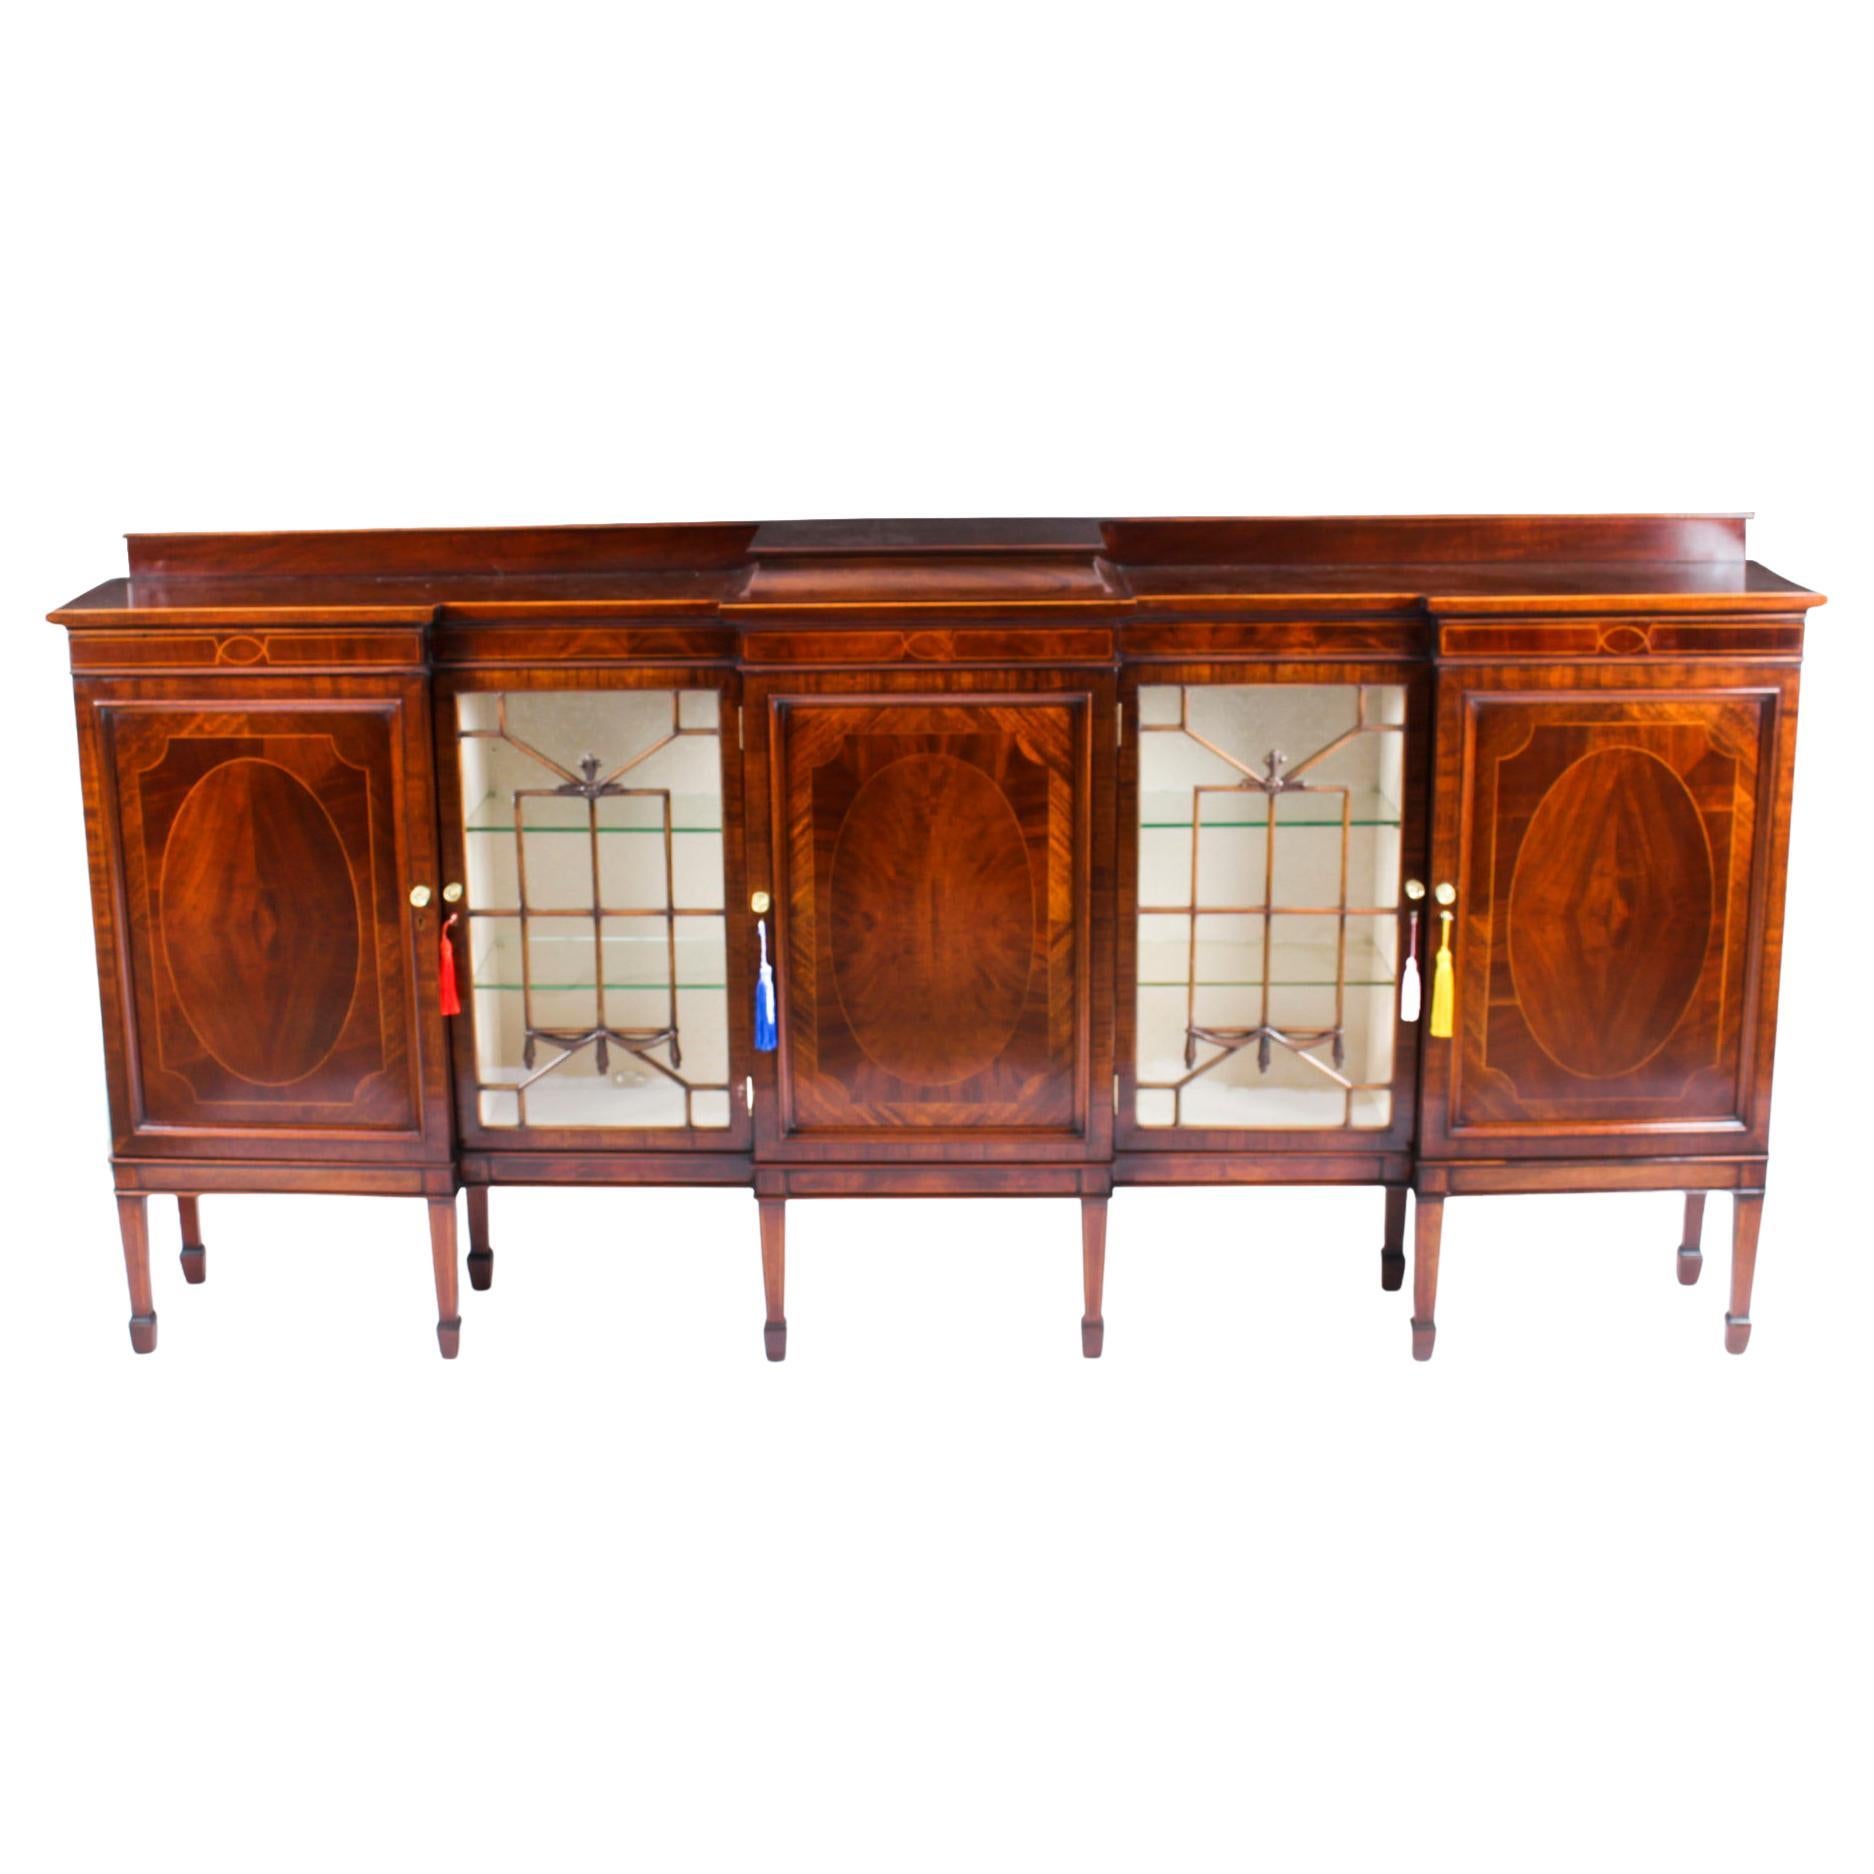 Antique Edwardian Breakfront Sideboard Display Cabinet, Early 20th Century